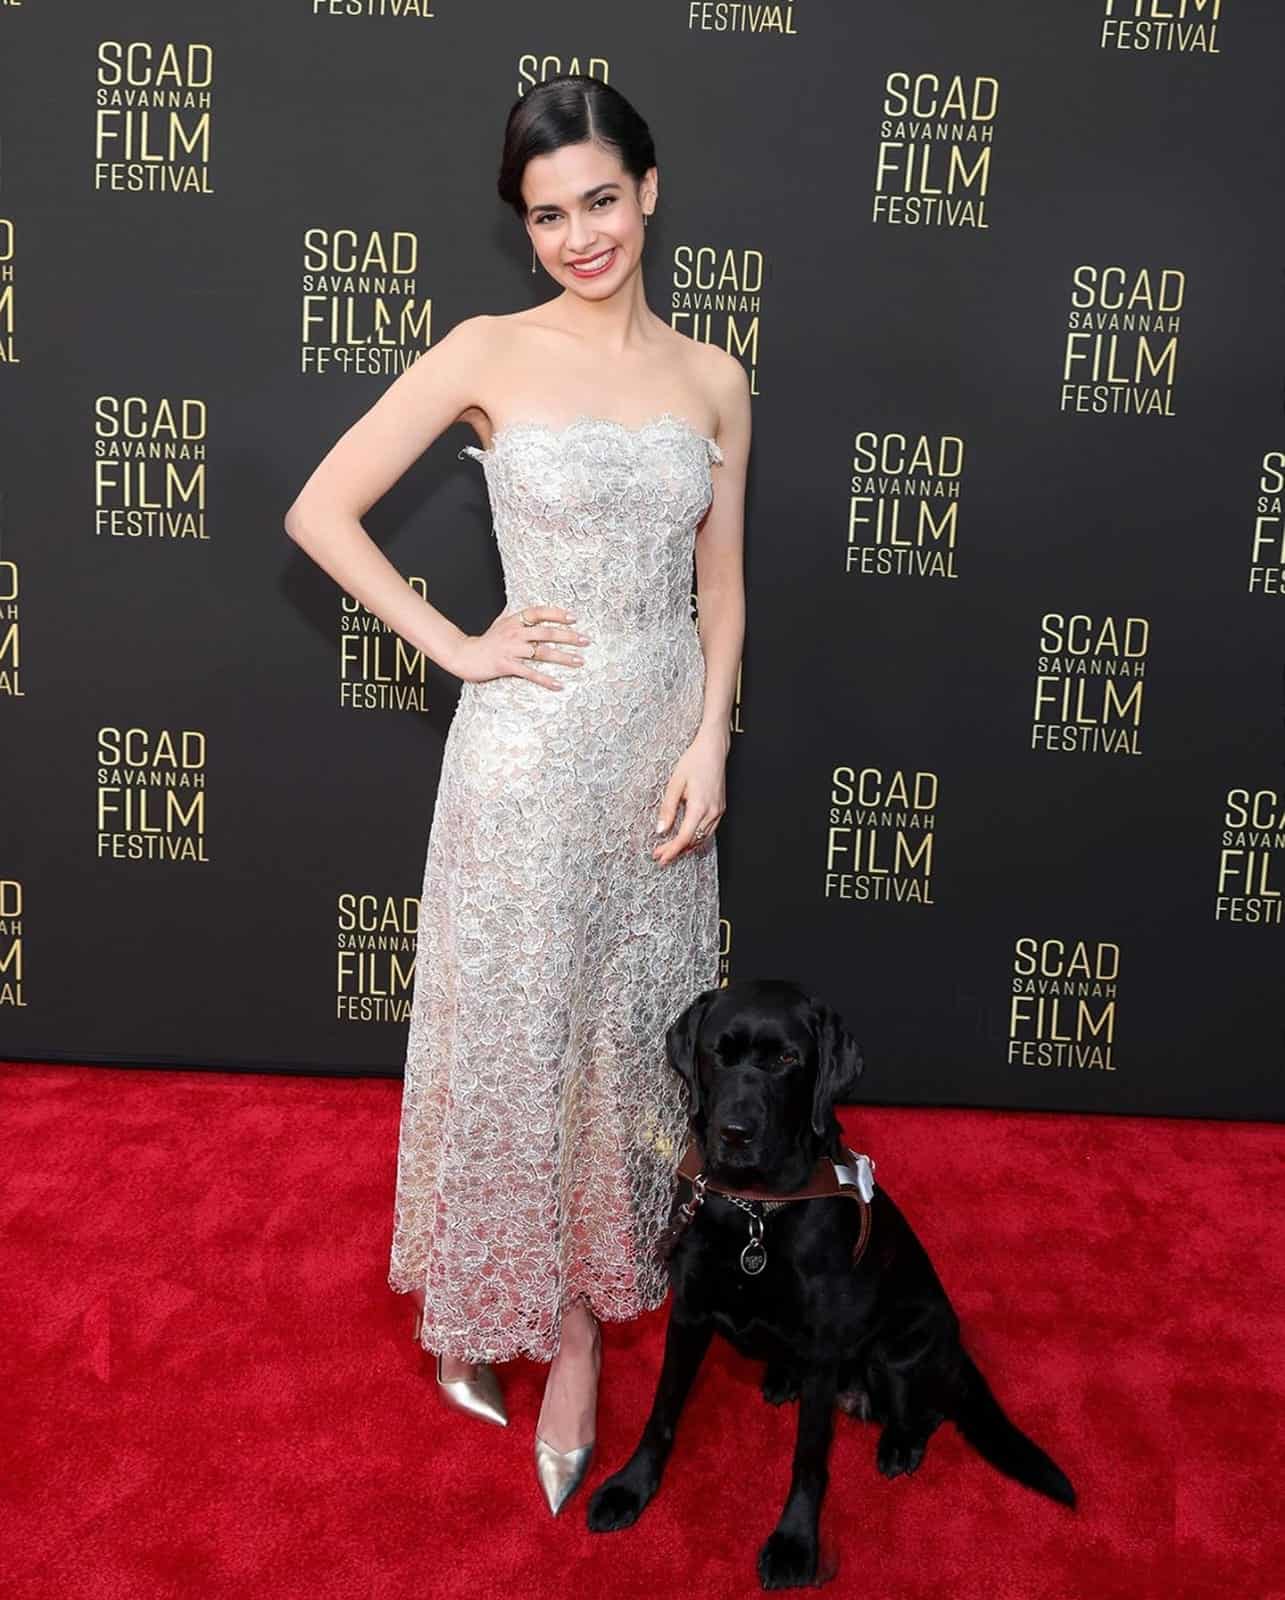 Aria Mia Loberti was seen with her guide dog Ingrid in a film festival.